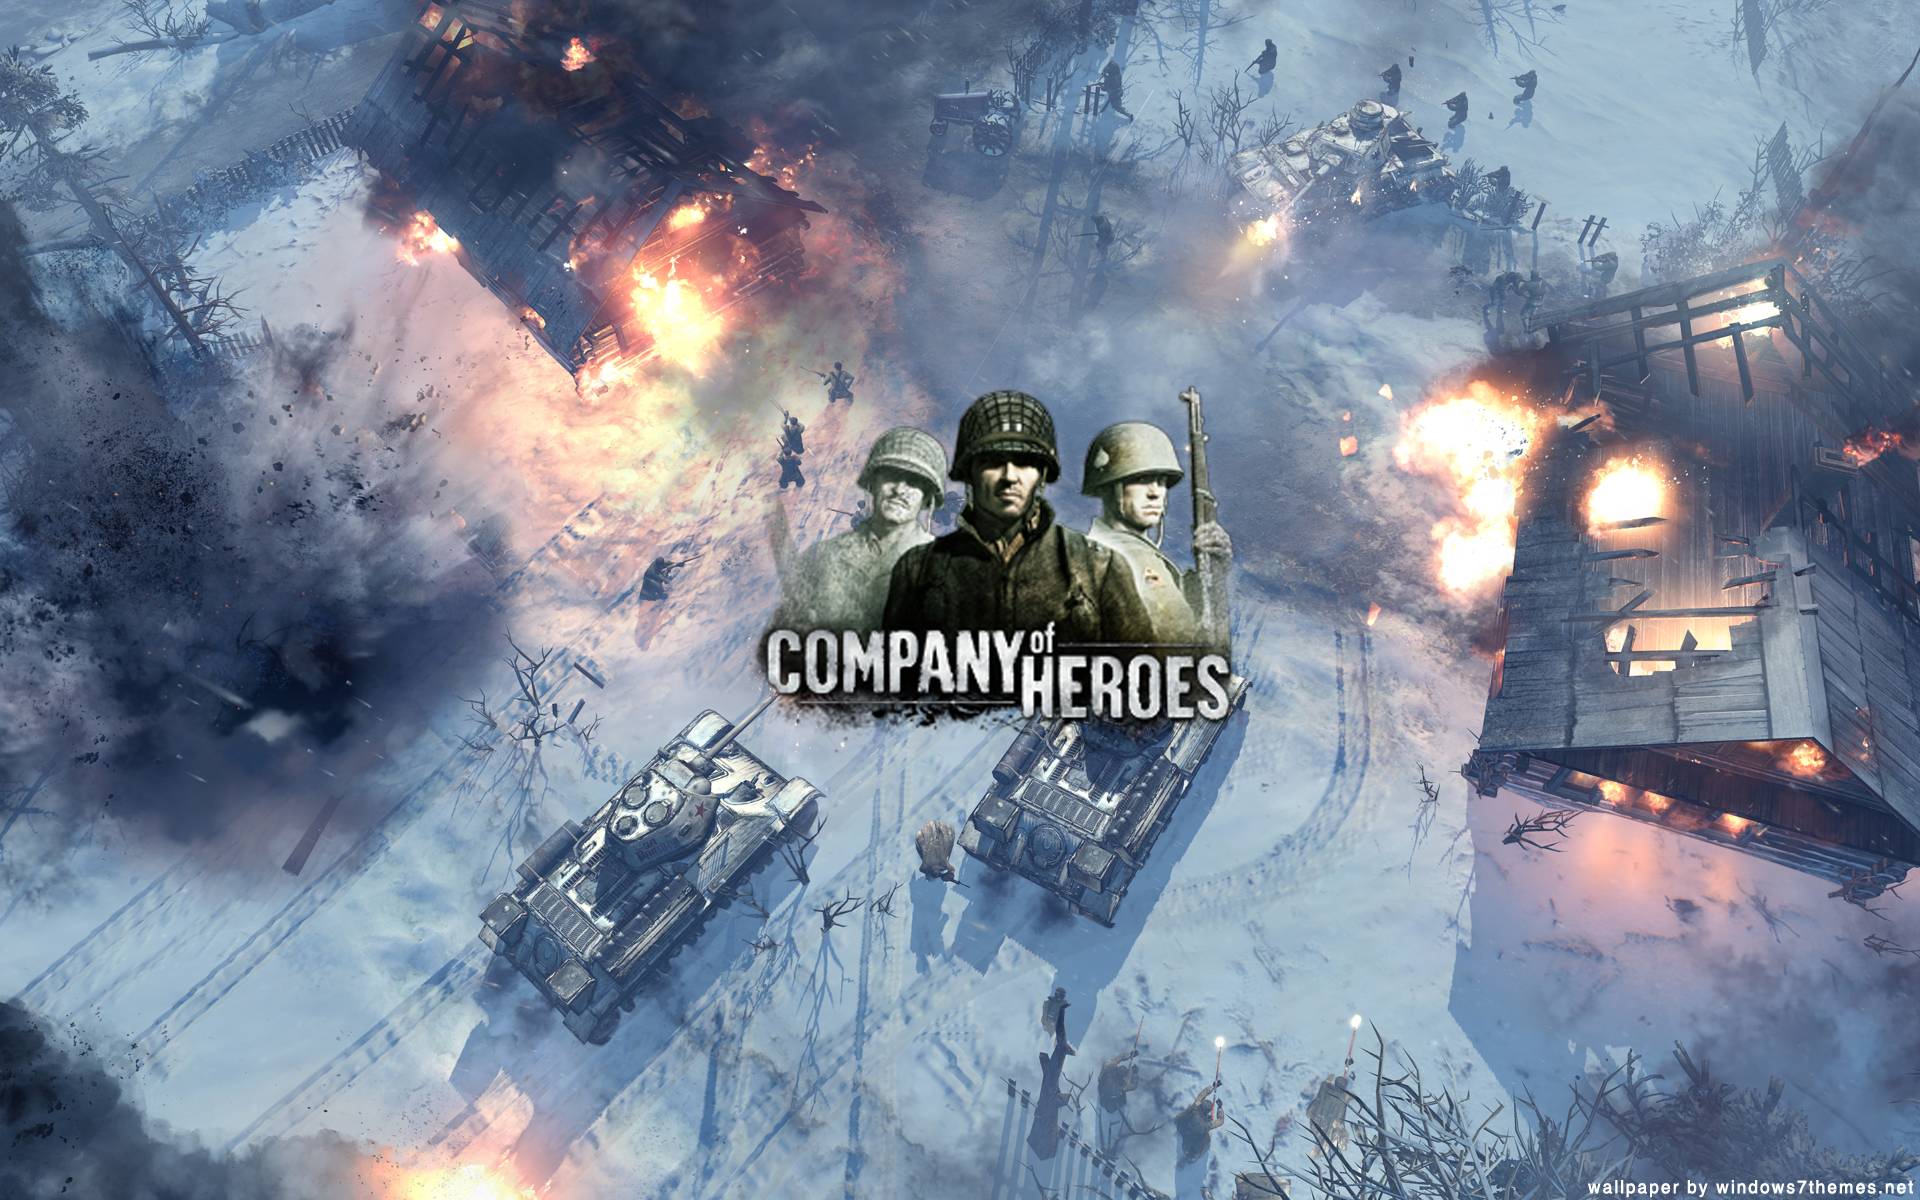 Company of Heroes 2 Video Game wallpapers 112 Wallpapers  HD Wallpapers   Heroe Pc gamer Informática